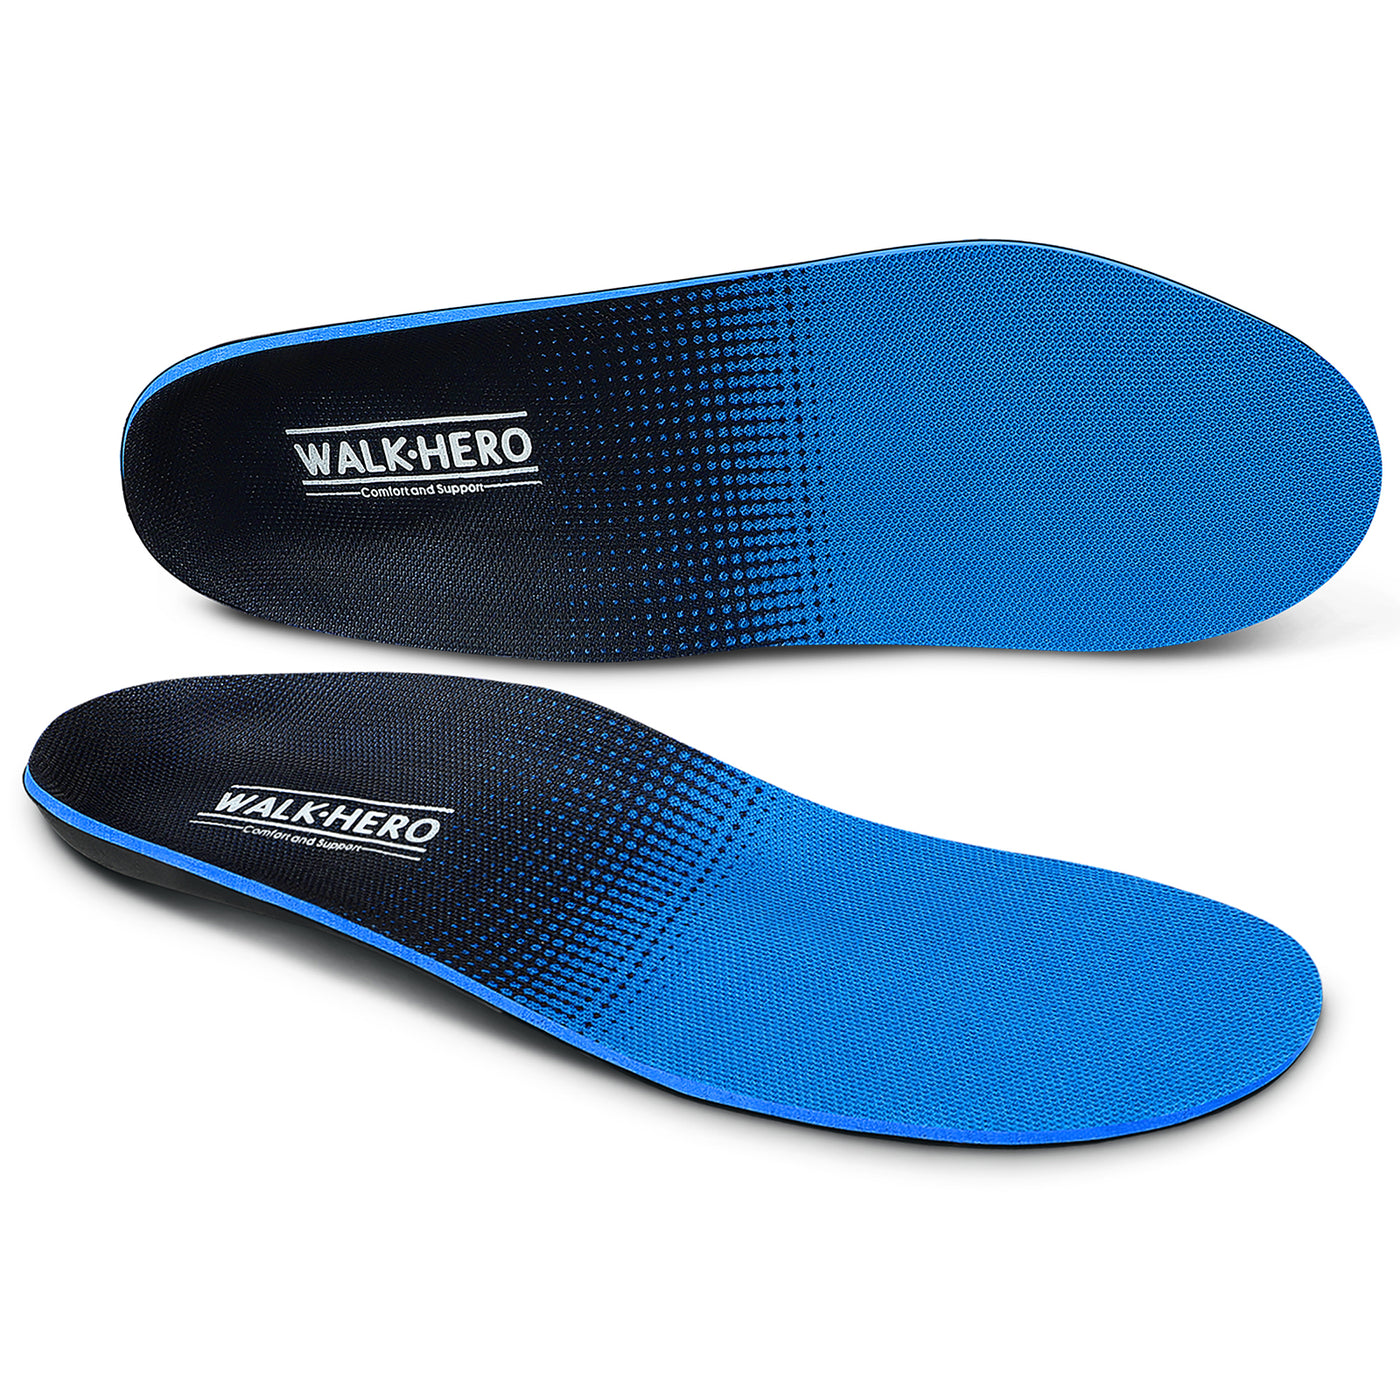 WALKHERO Women's Arch Support Orthotic Insoles New Blue & Blue 2-Pairs